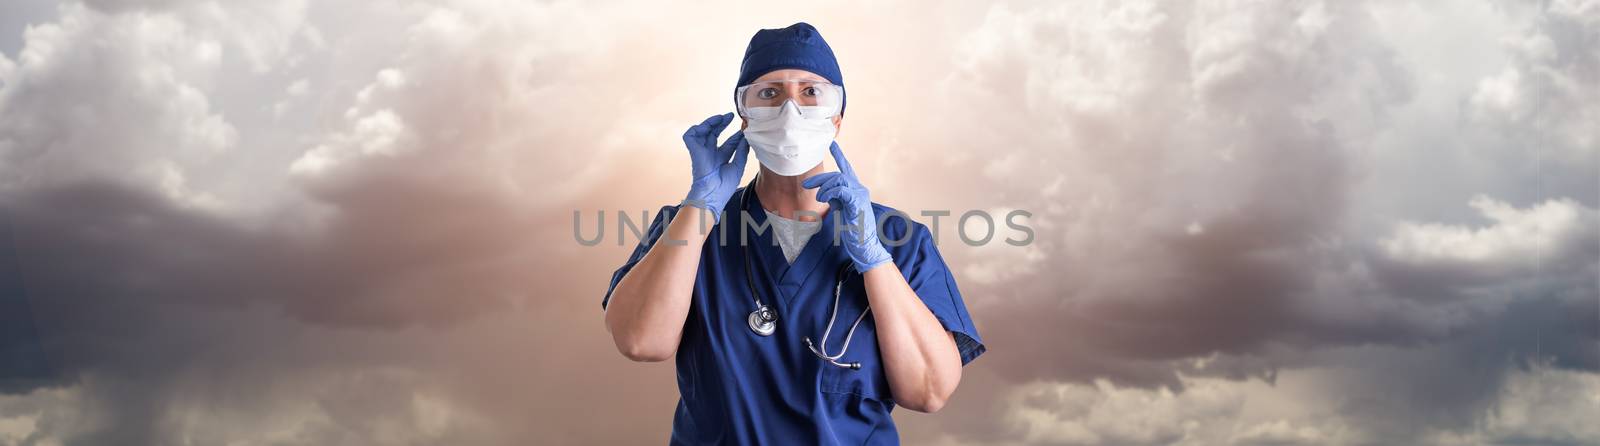 Doctor or Nurse Adjusting Medical Face Mask Wearing Personal Protective Equipment Over Ominous Clouds.